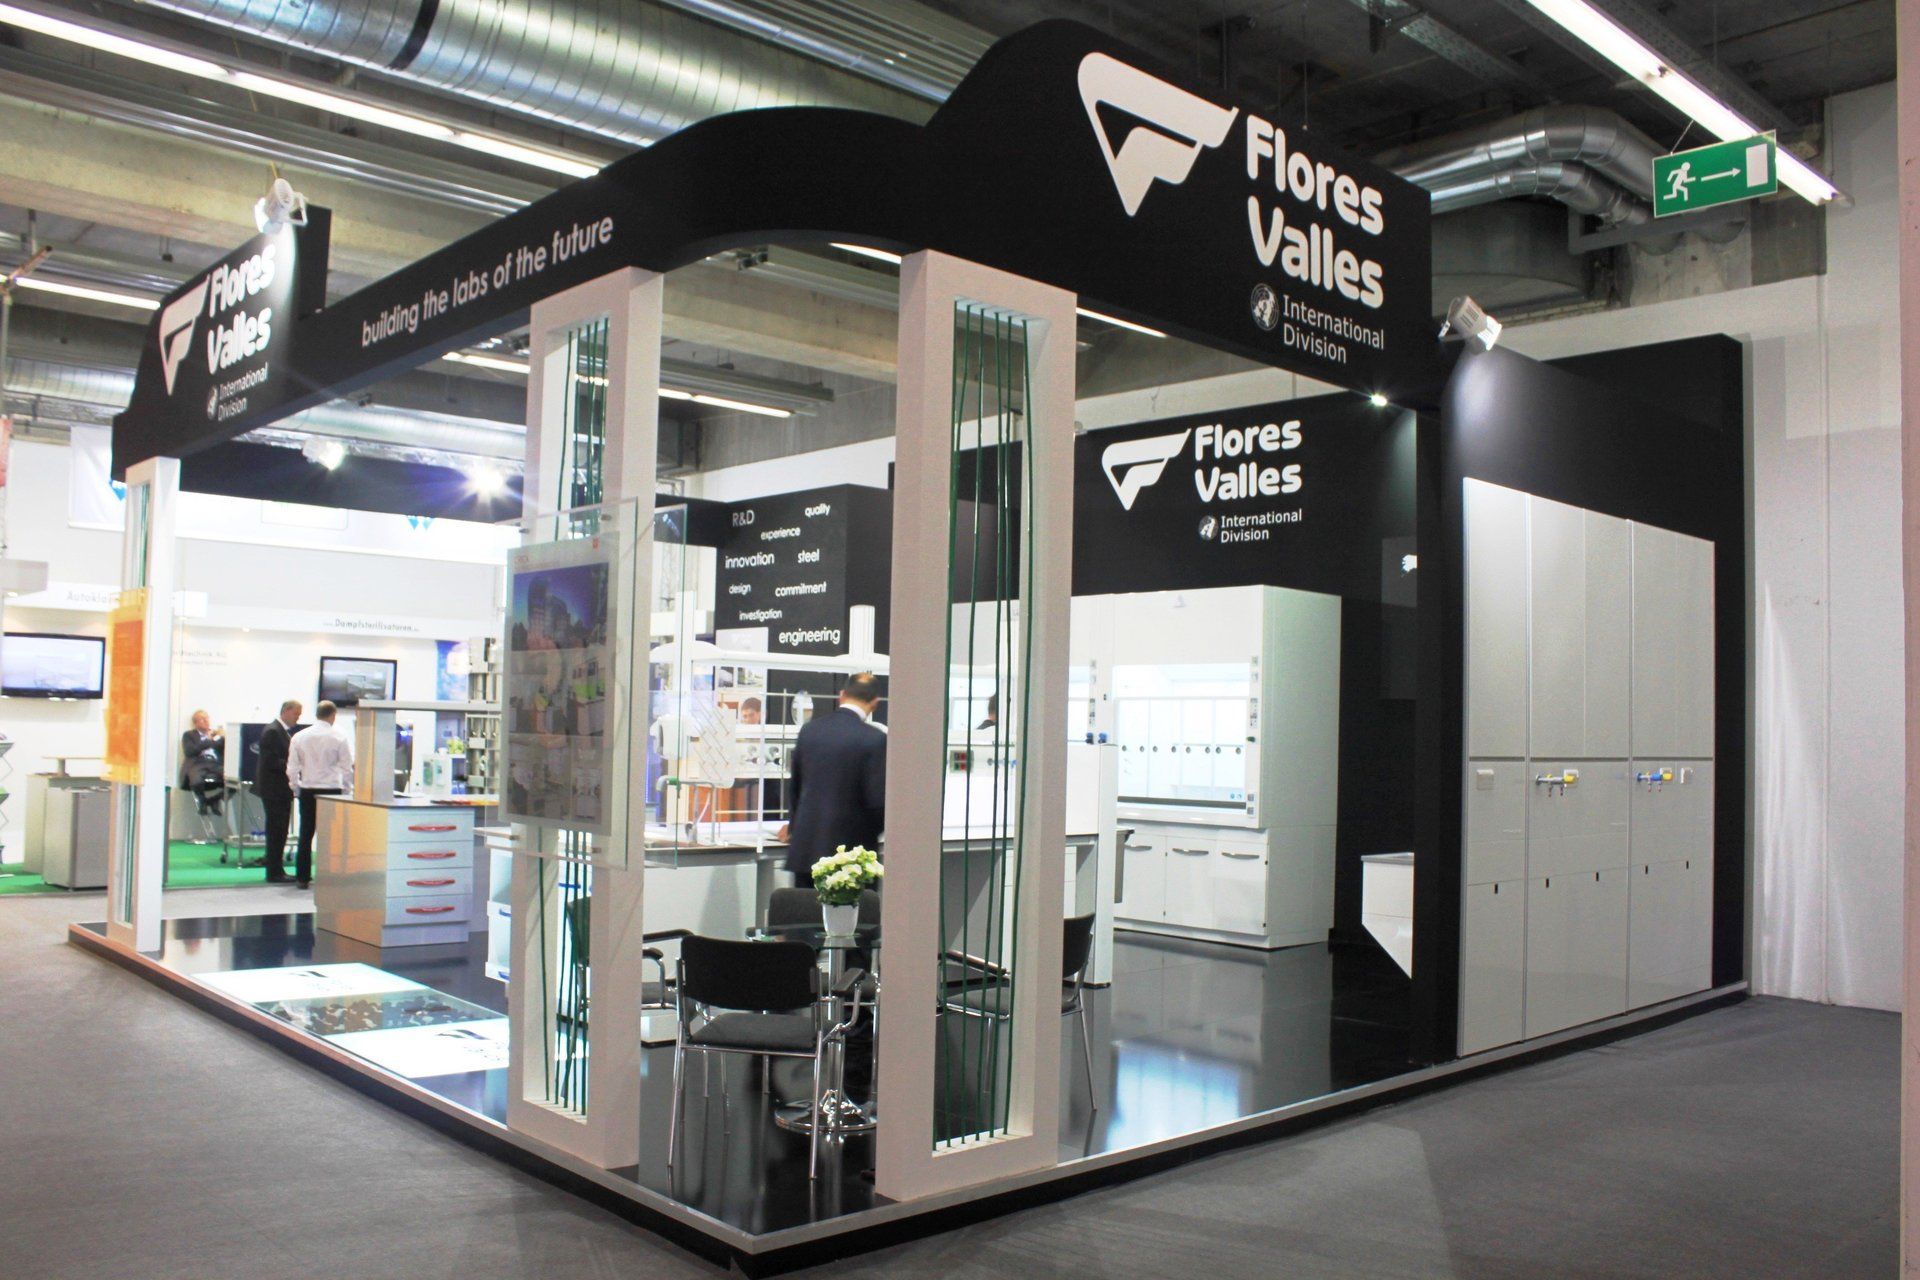 Flores Valles @ Achema 2012. Booth designed and built by Essential Global Fairs.